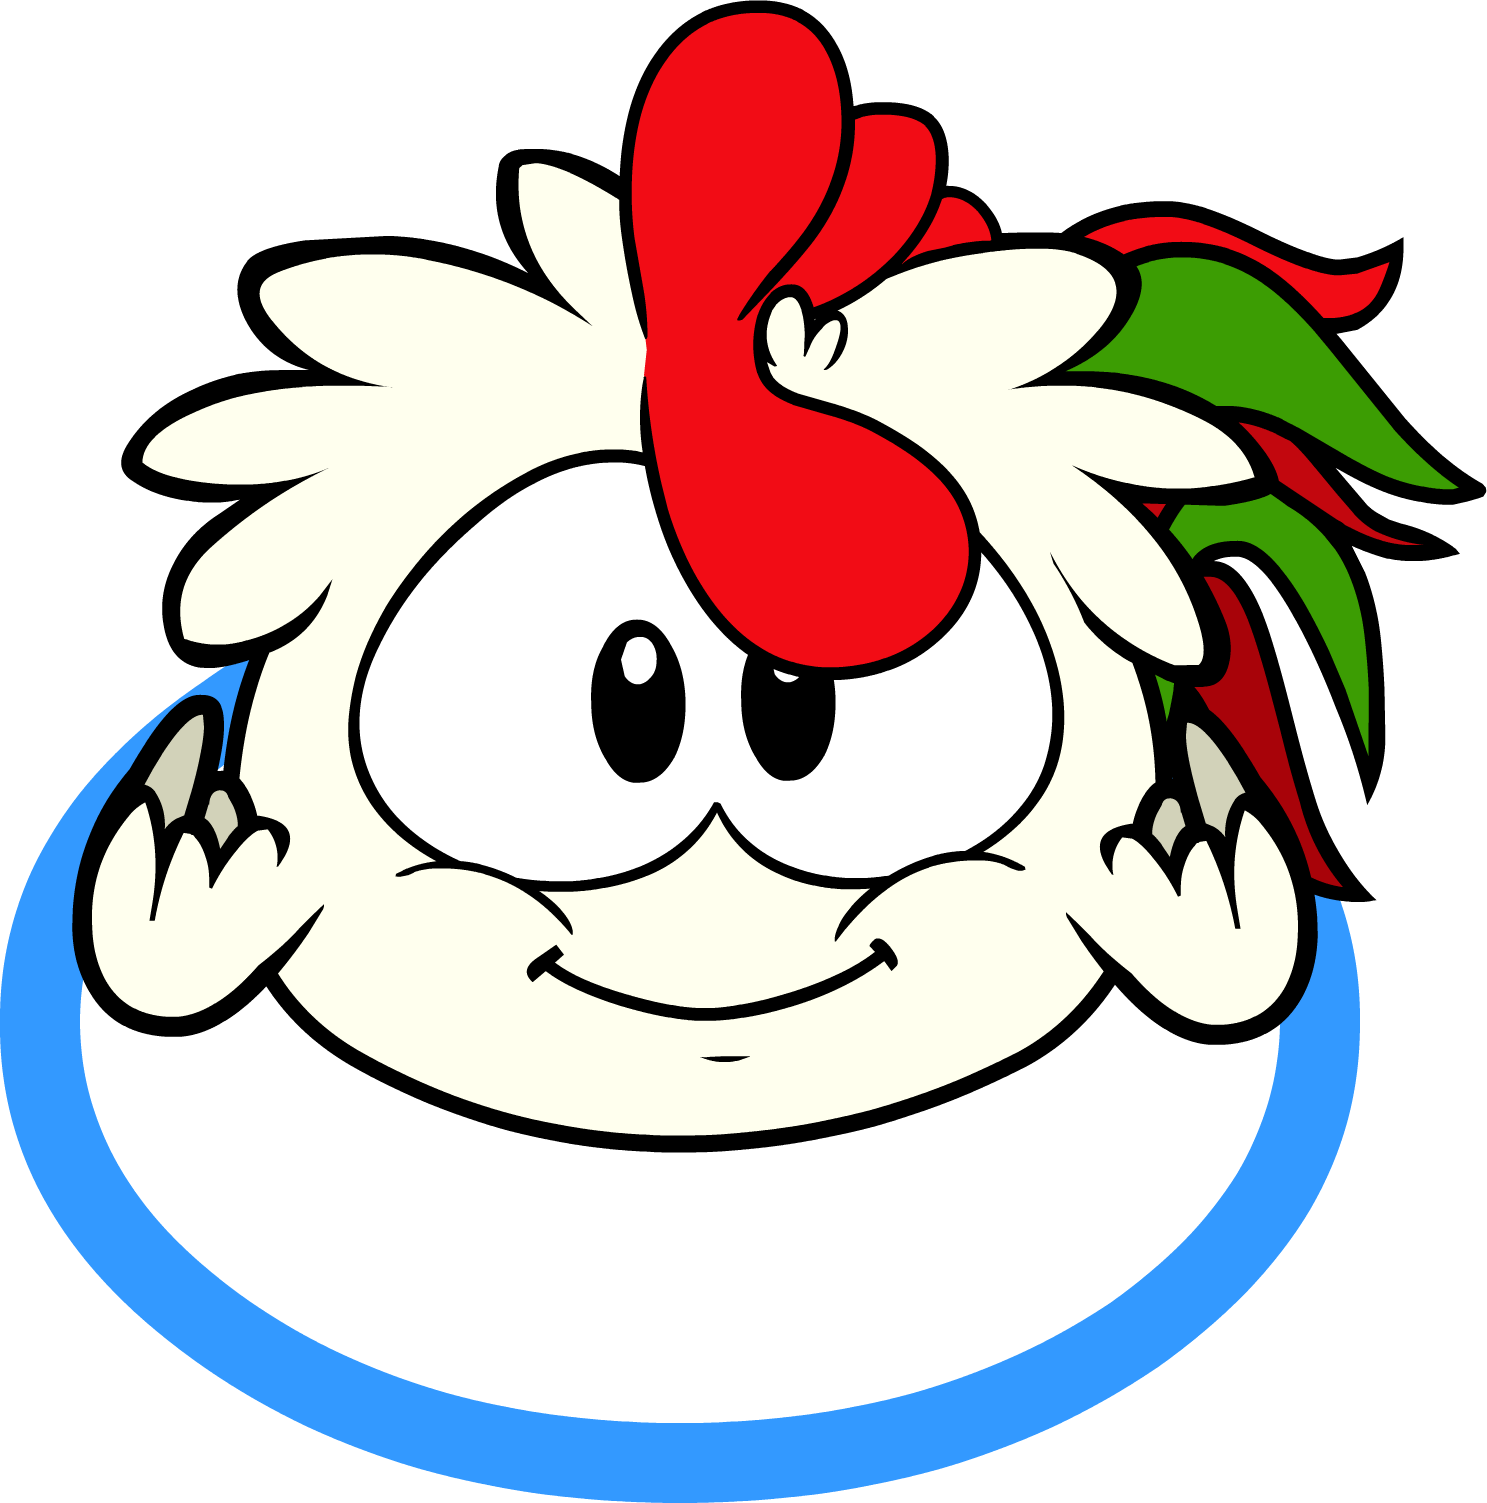 Chicken puffle in-game